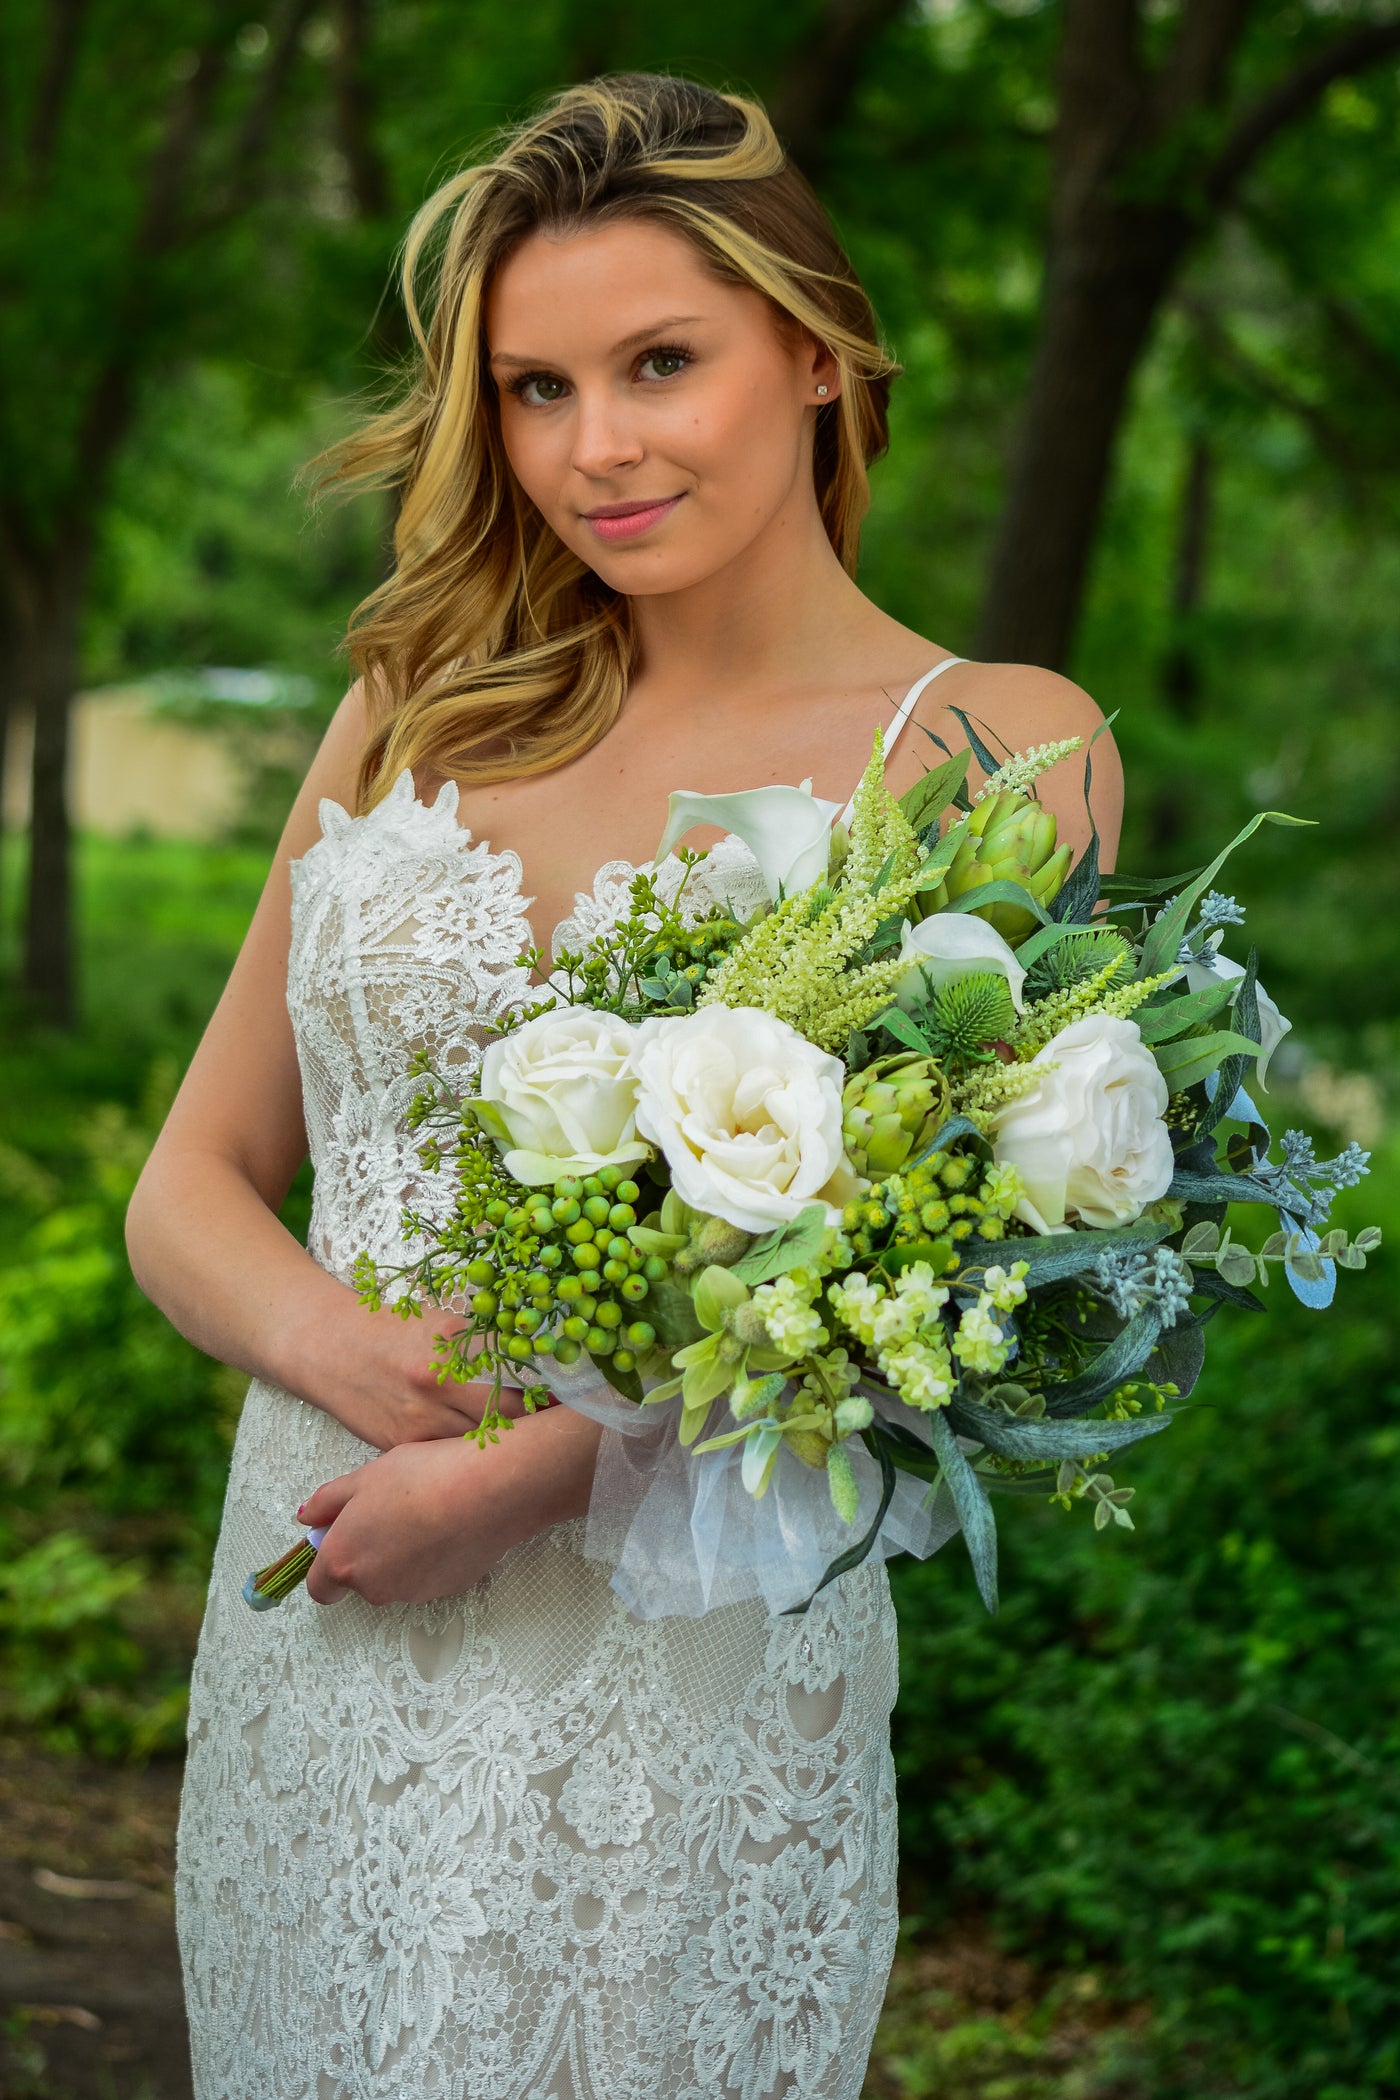 Rent a Rose-Bridal Bouquet- white , cream and green side held bouquet. Rent for five days for $98.00